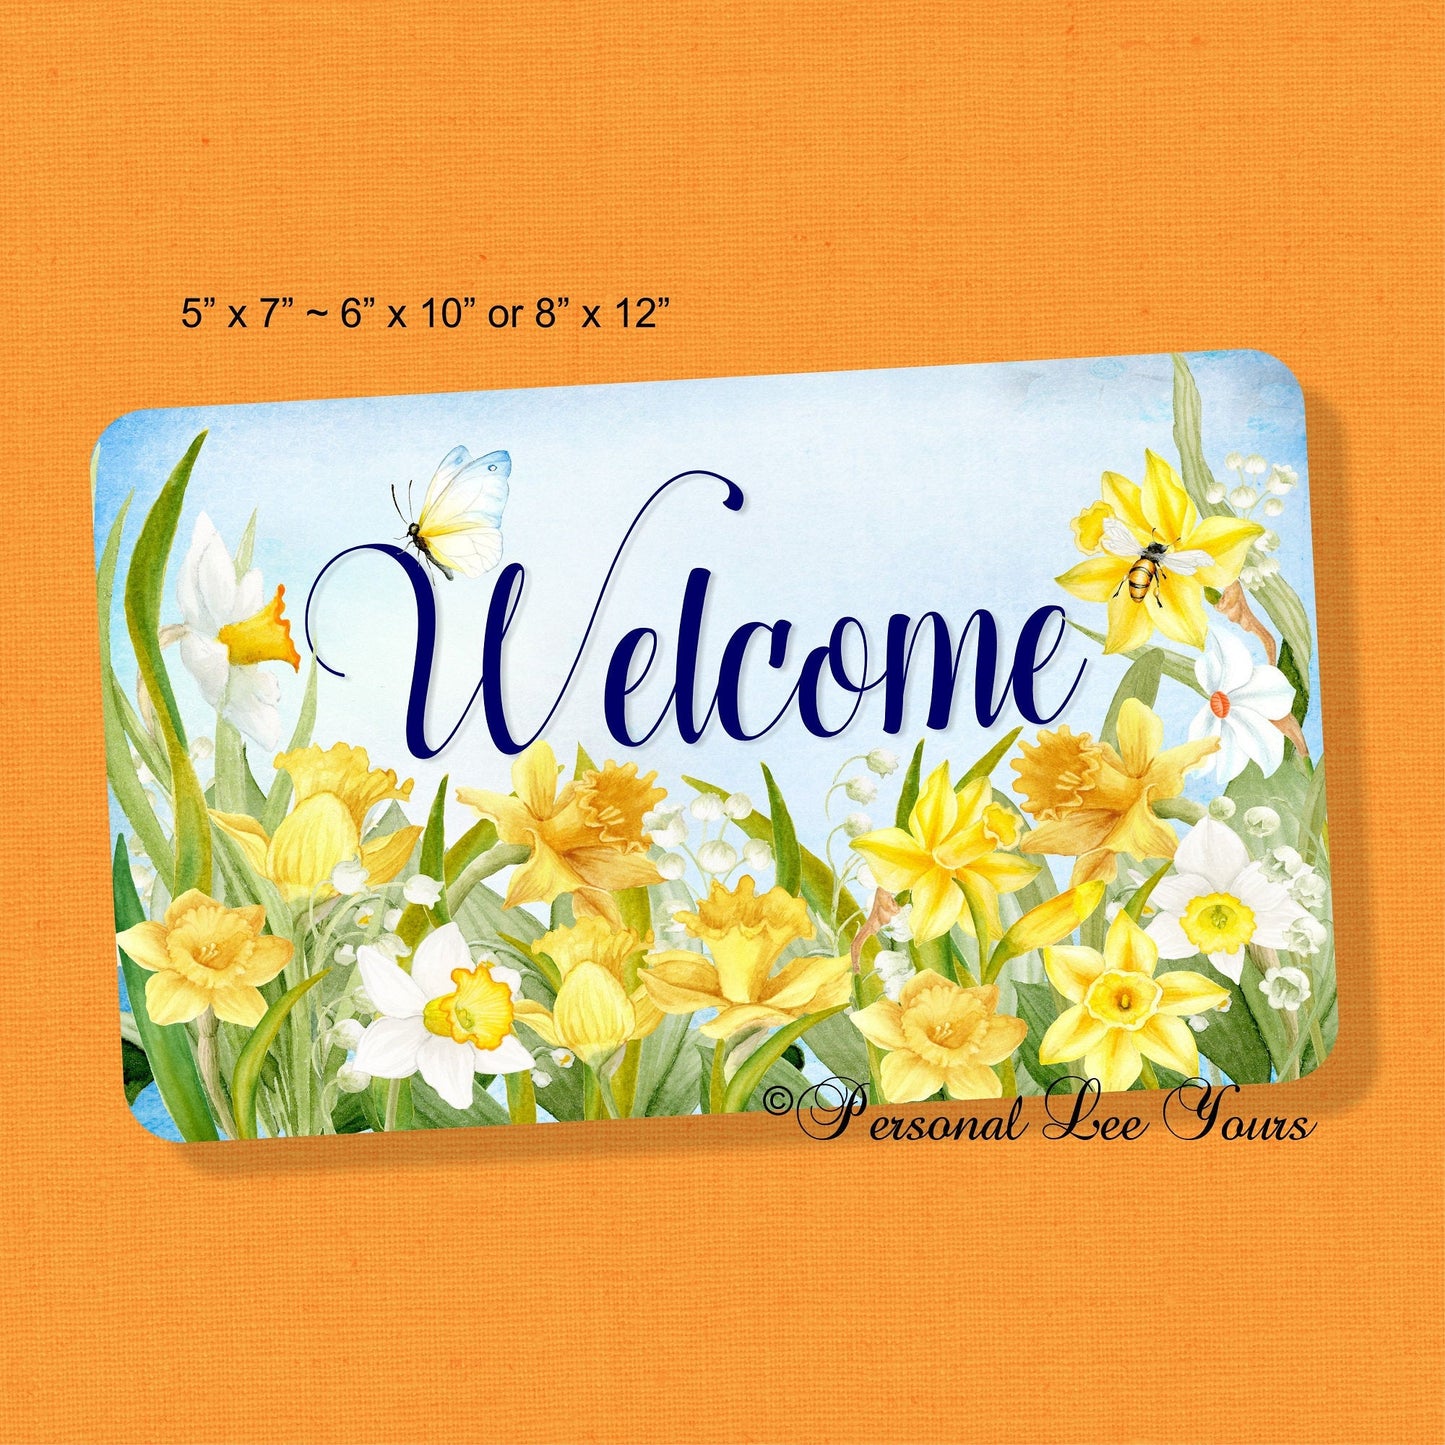 Metal Wreath Sign * Daffodil Welcome * 3 Sizes * Lightweight